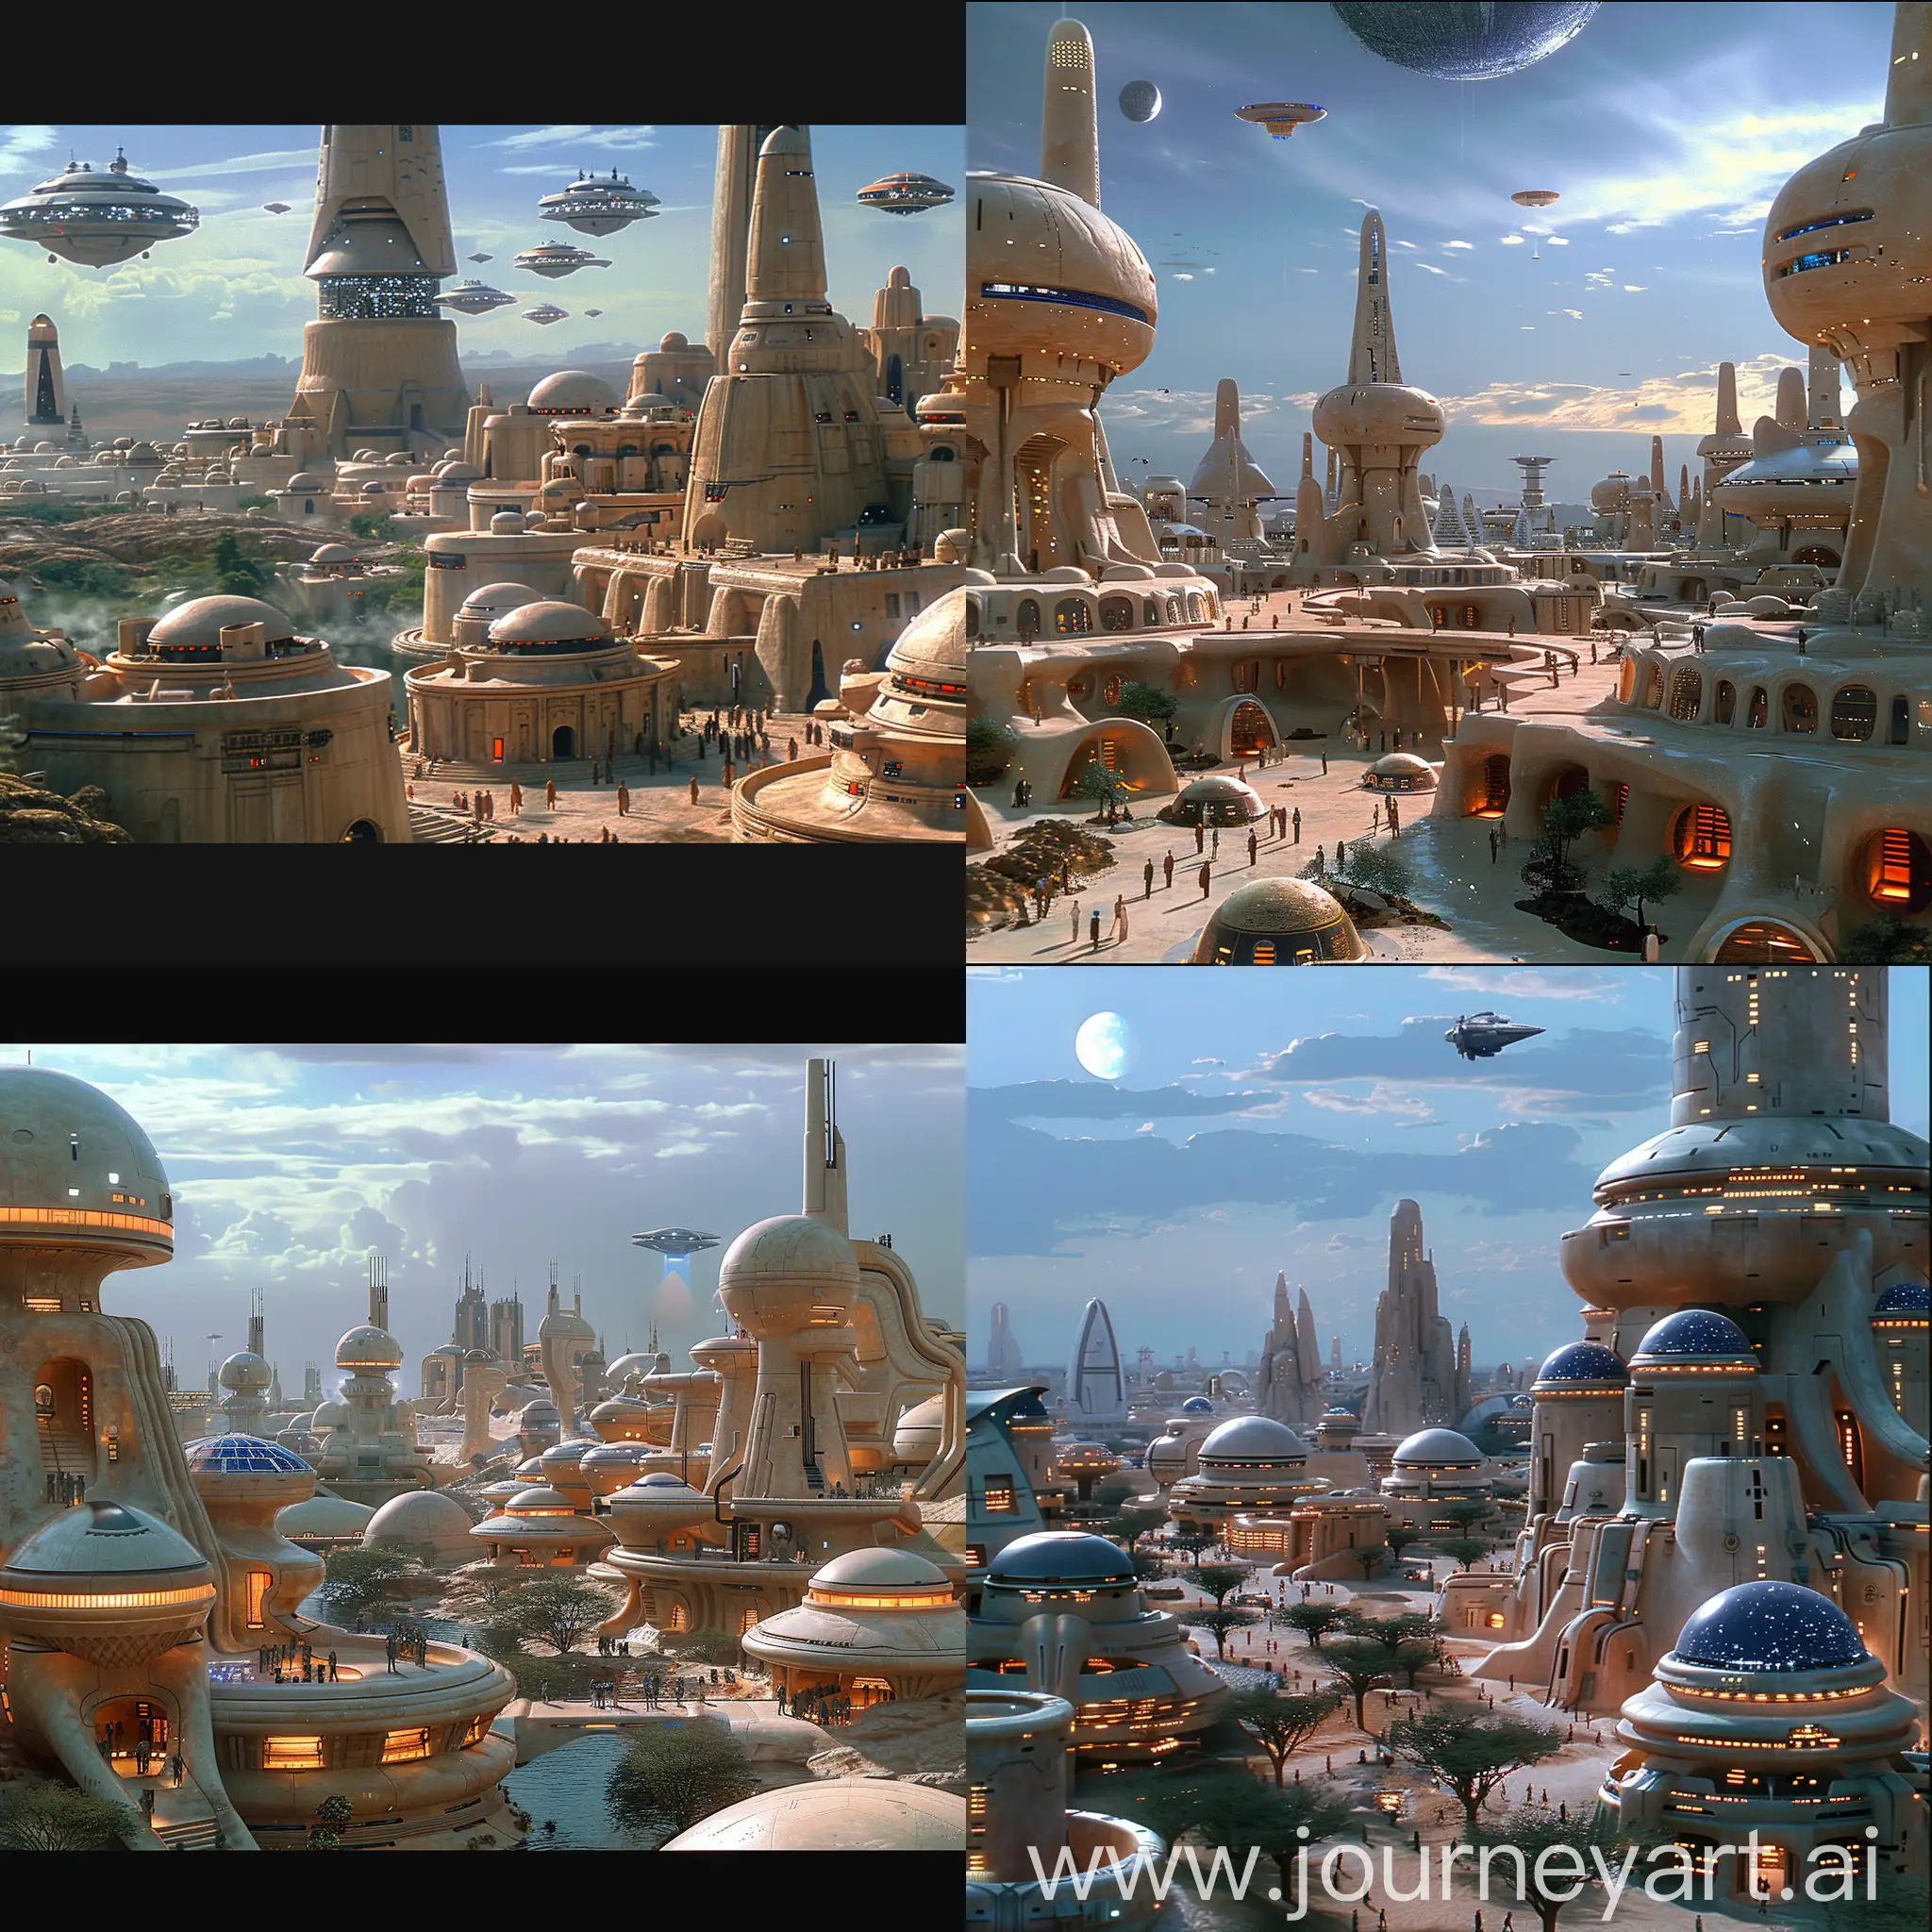 Futuristic-Star-Wars-Mos-Eisley-Sustainable-Urban-Oasis-with-Advanced-Technology